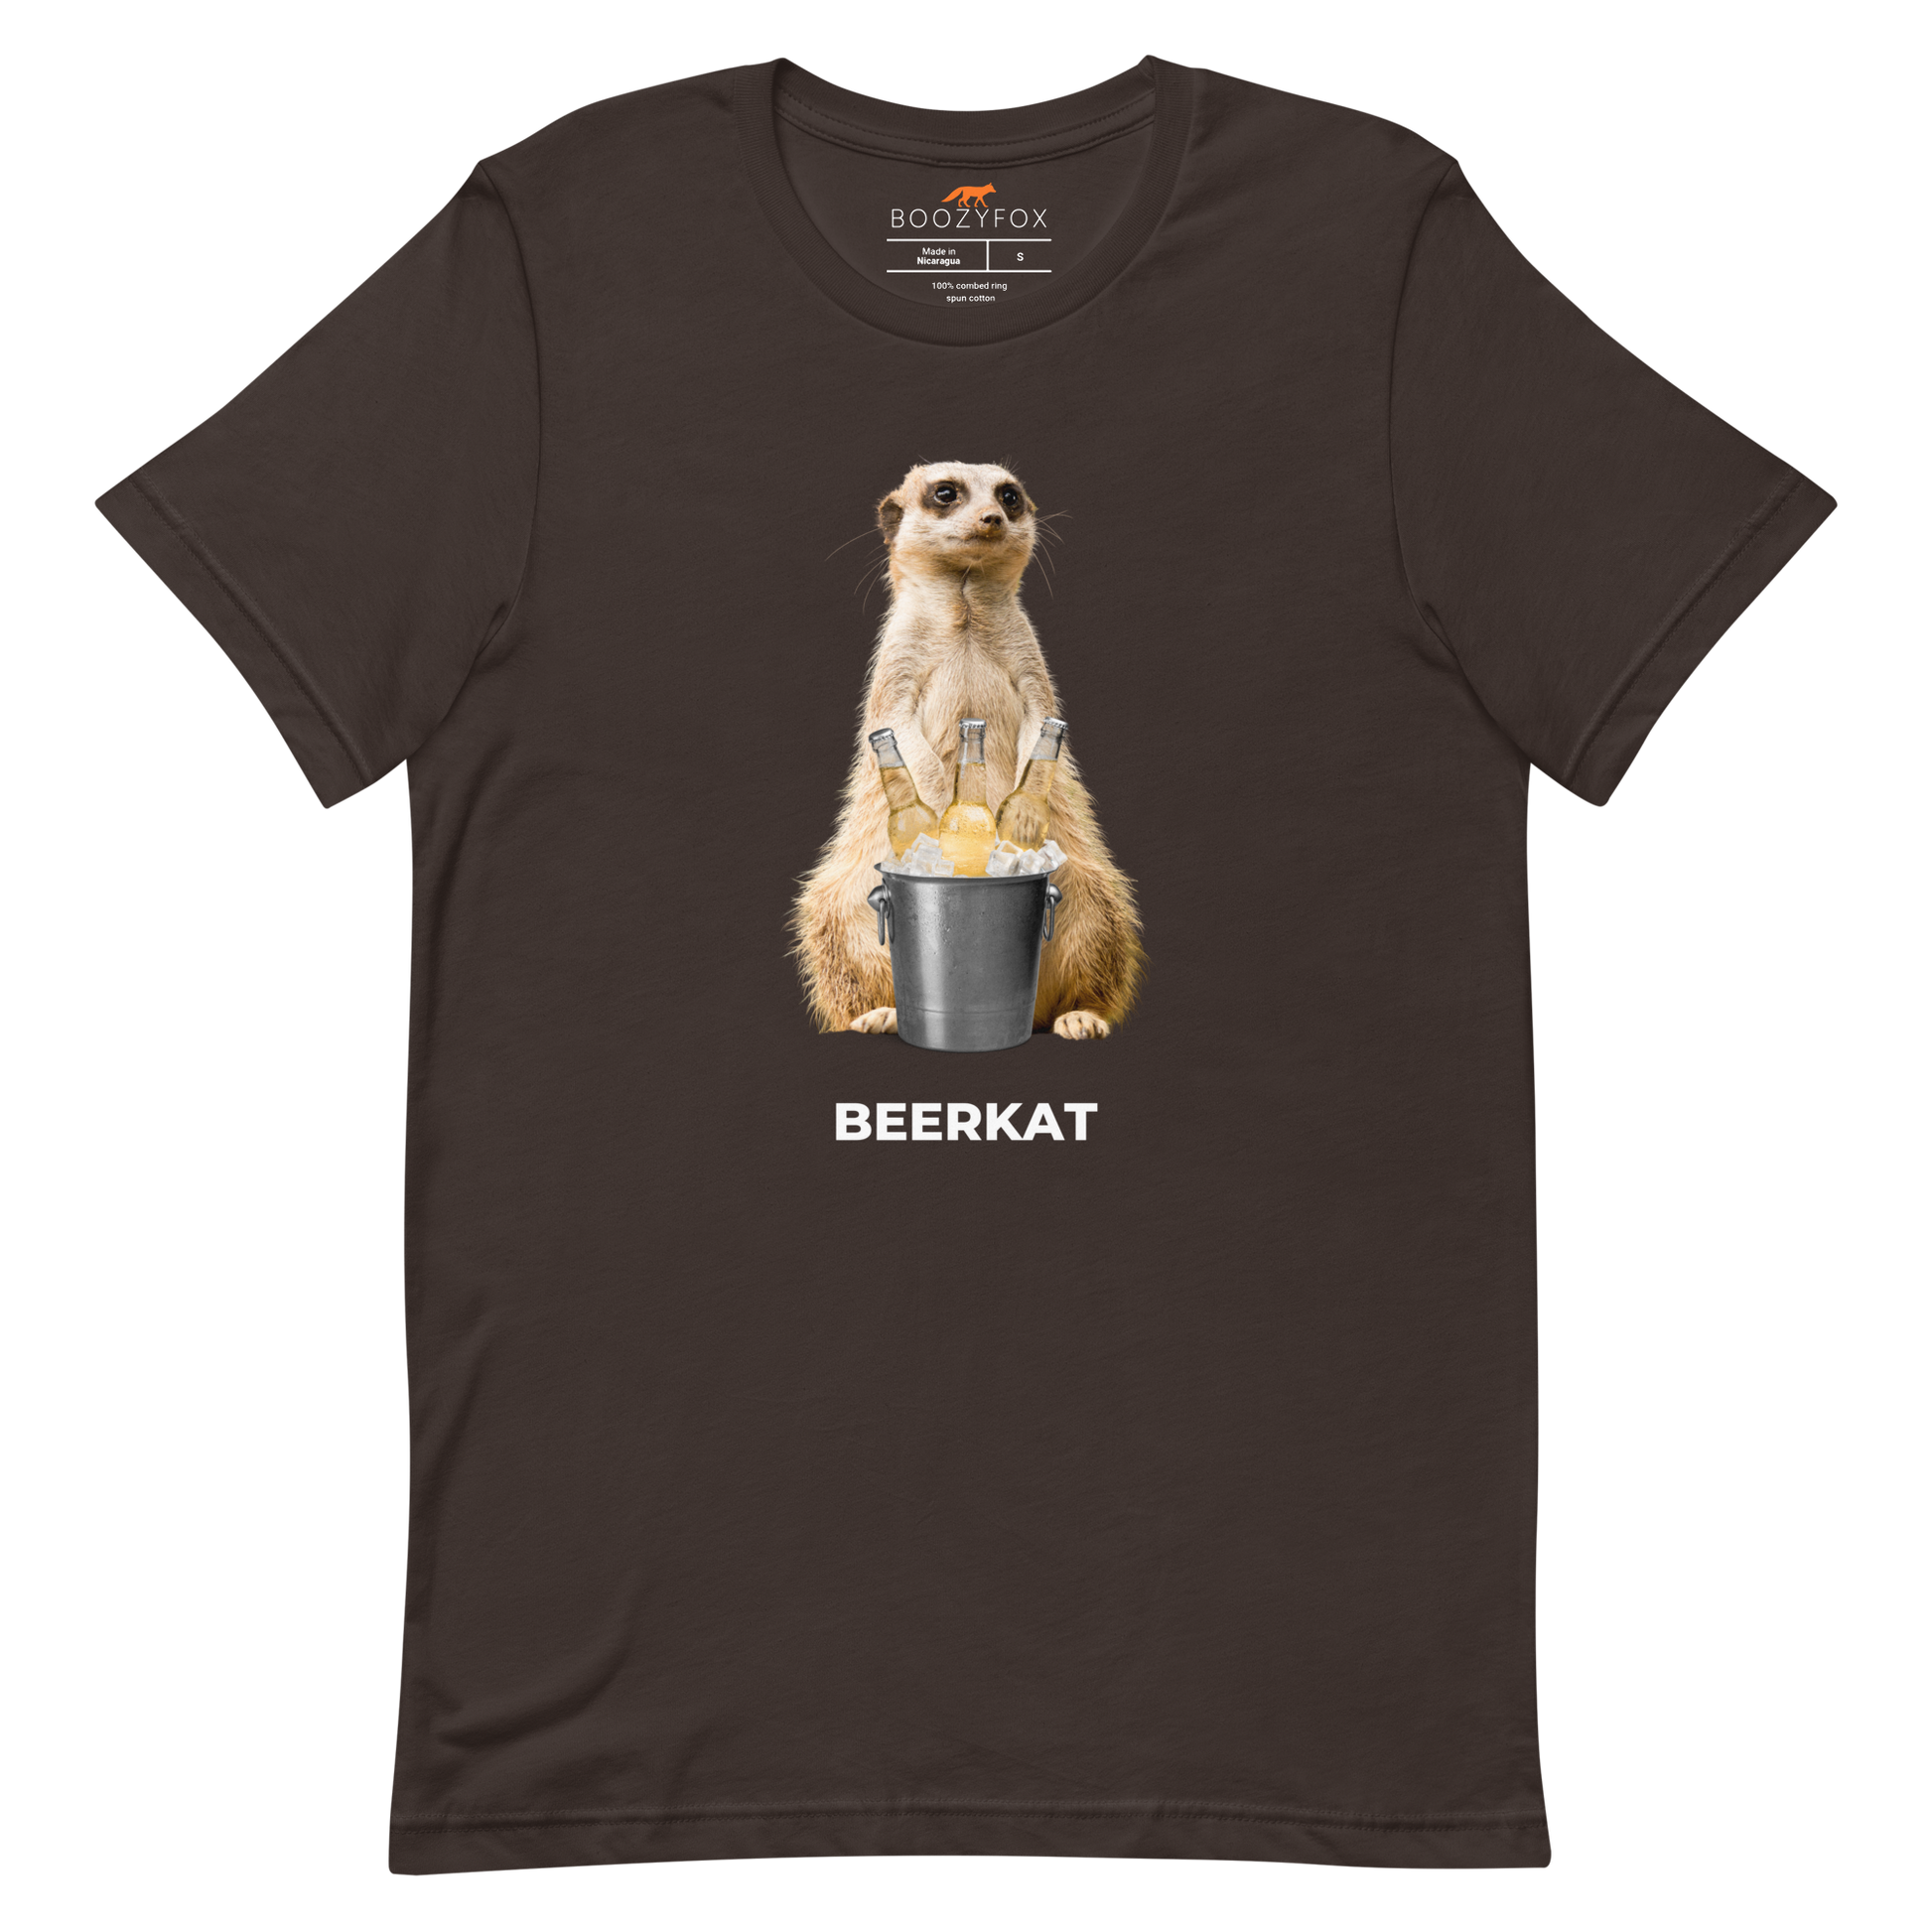 Brown Premium Meerkat T-Shirt featuring a hilarious Beerkat graphic on the chest - Funny Graphic Meerkat Tees - Boozy Fox